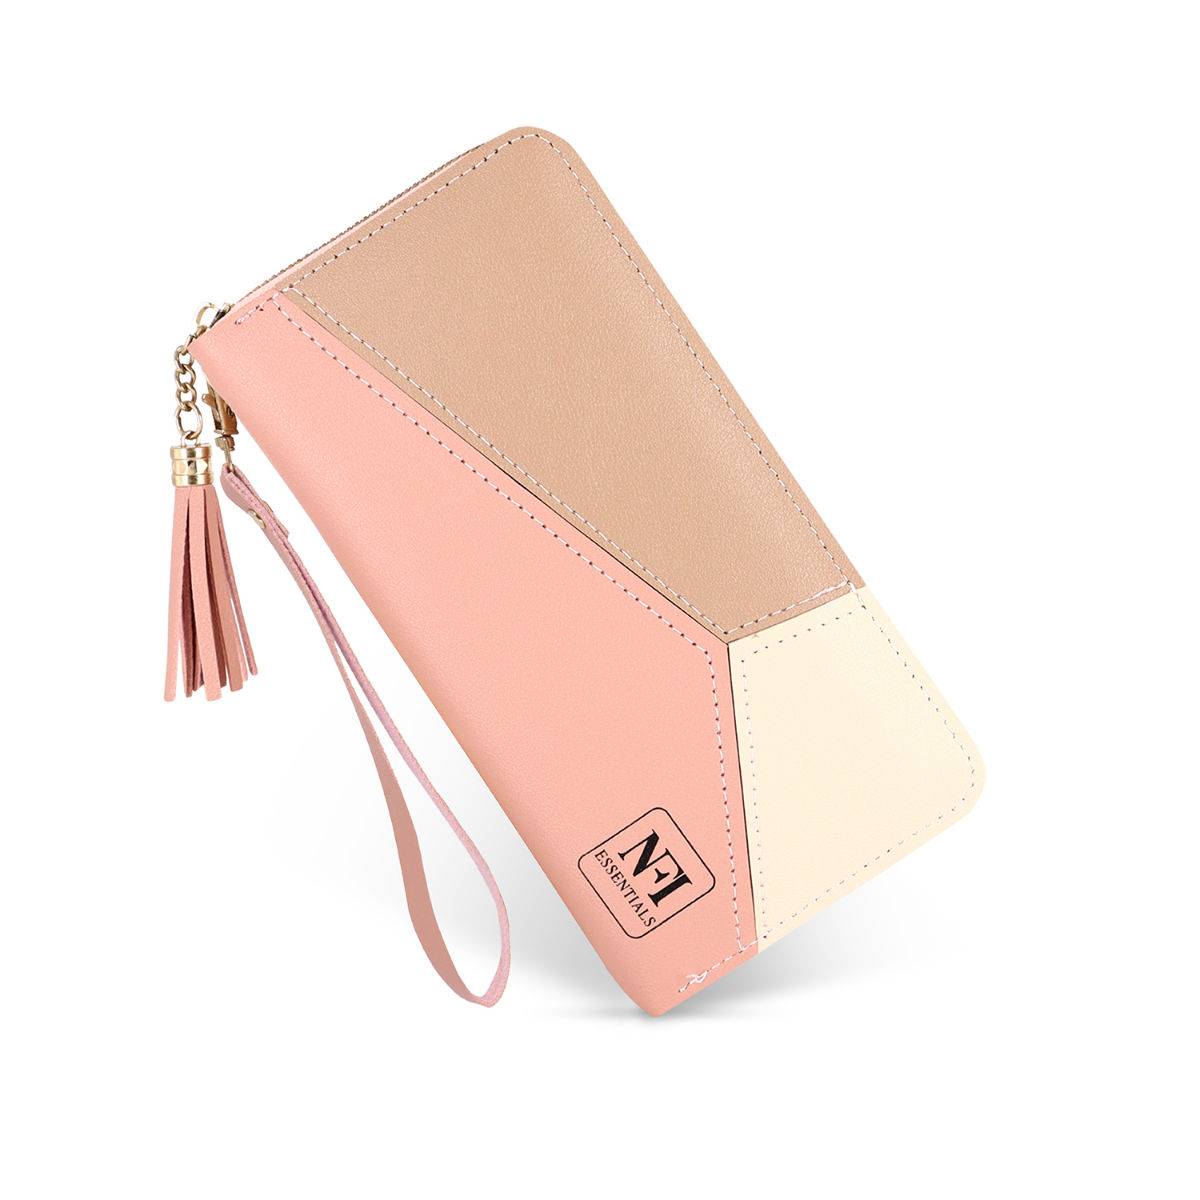 New Ladies Wallet Long Clutch Phone Bags Contrast Color Pu Leather Wallets  Women Money Bag Credit Card Holder Zipper Coin Purses | Fruugo QA